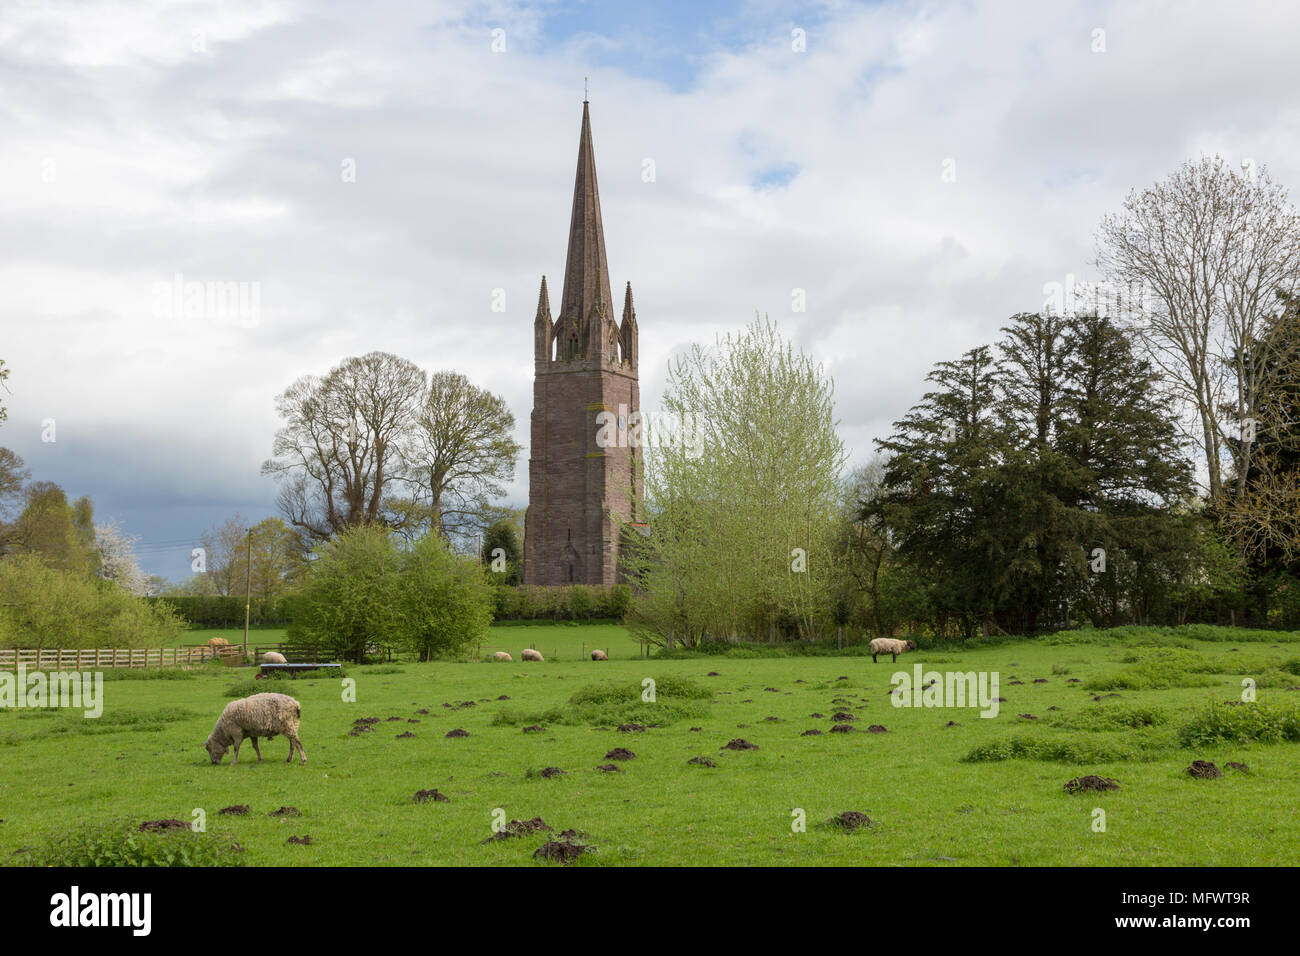 The Anglican Church of St Peter and St Paul, Weobley, Herefordshire UK Stock Photo